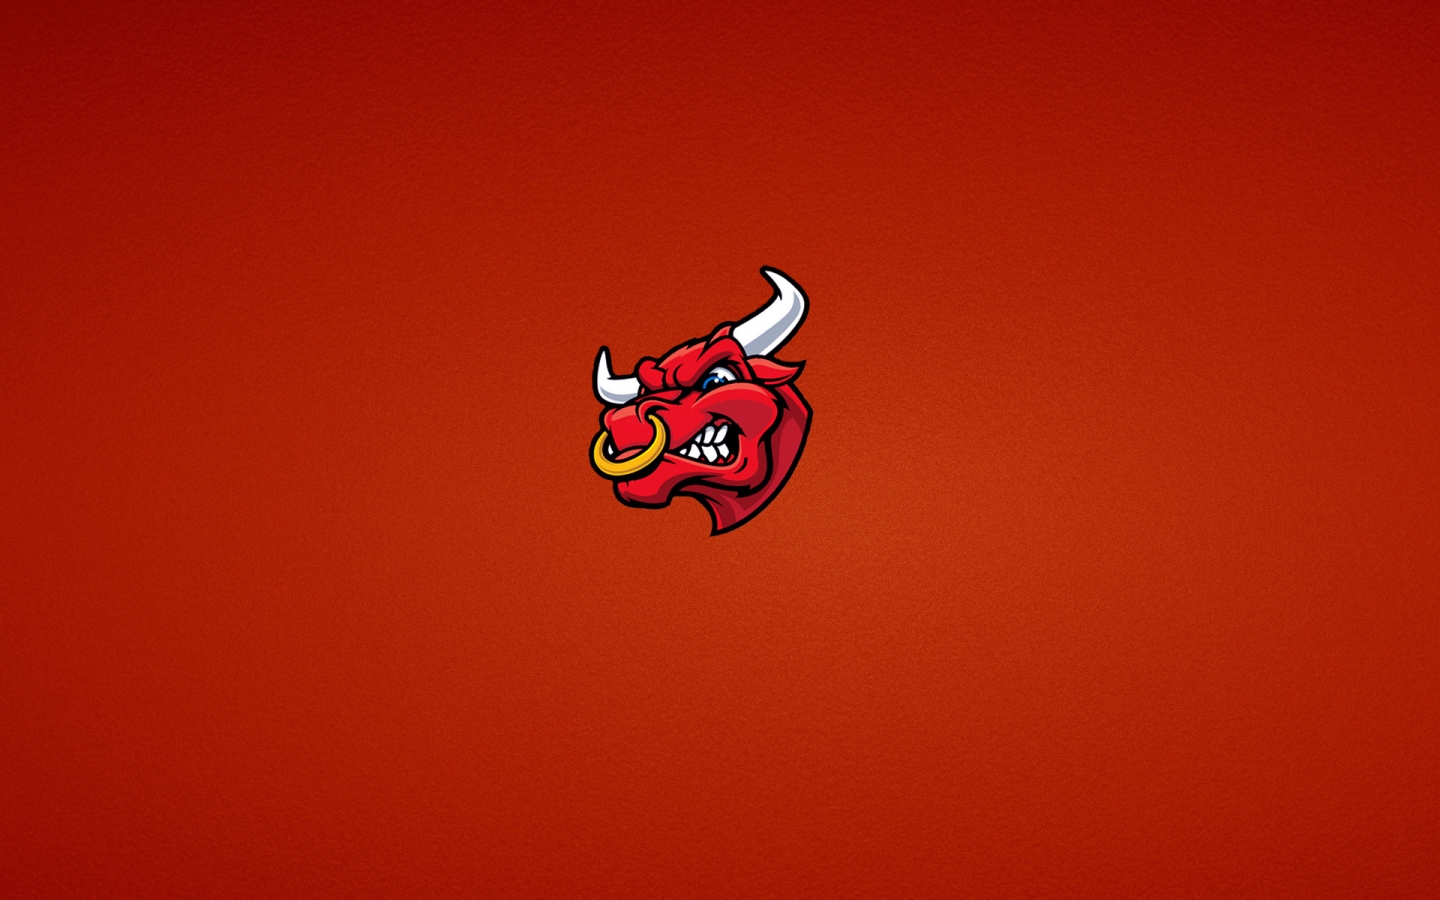 Red Bull Head for 1440 x 900 widescreen resolution